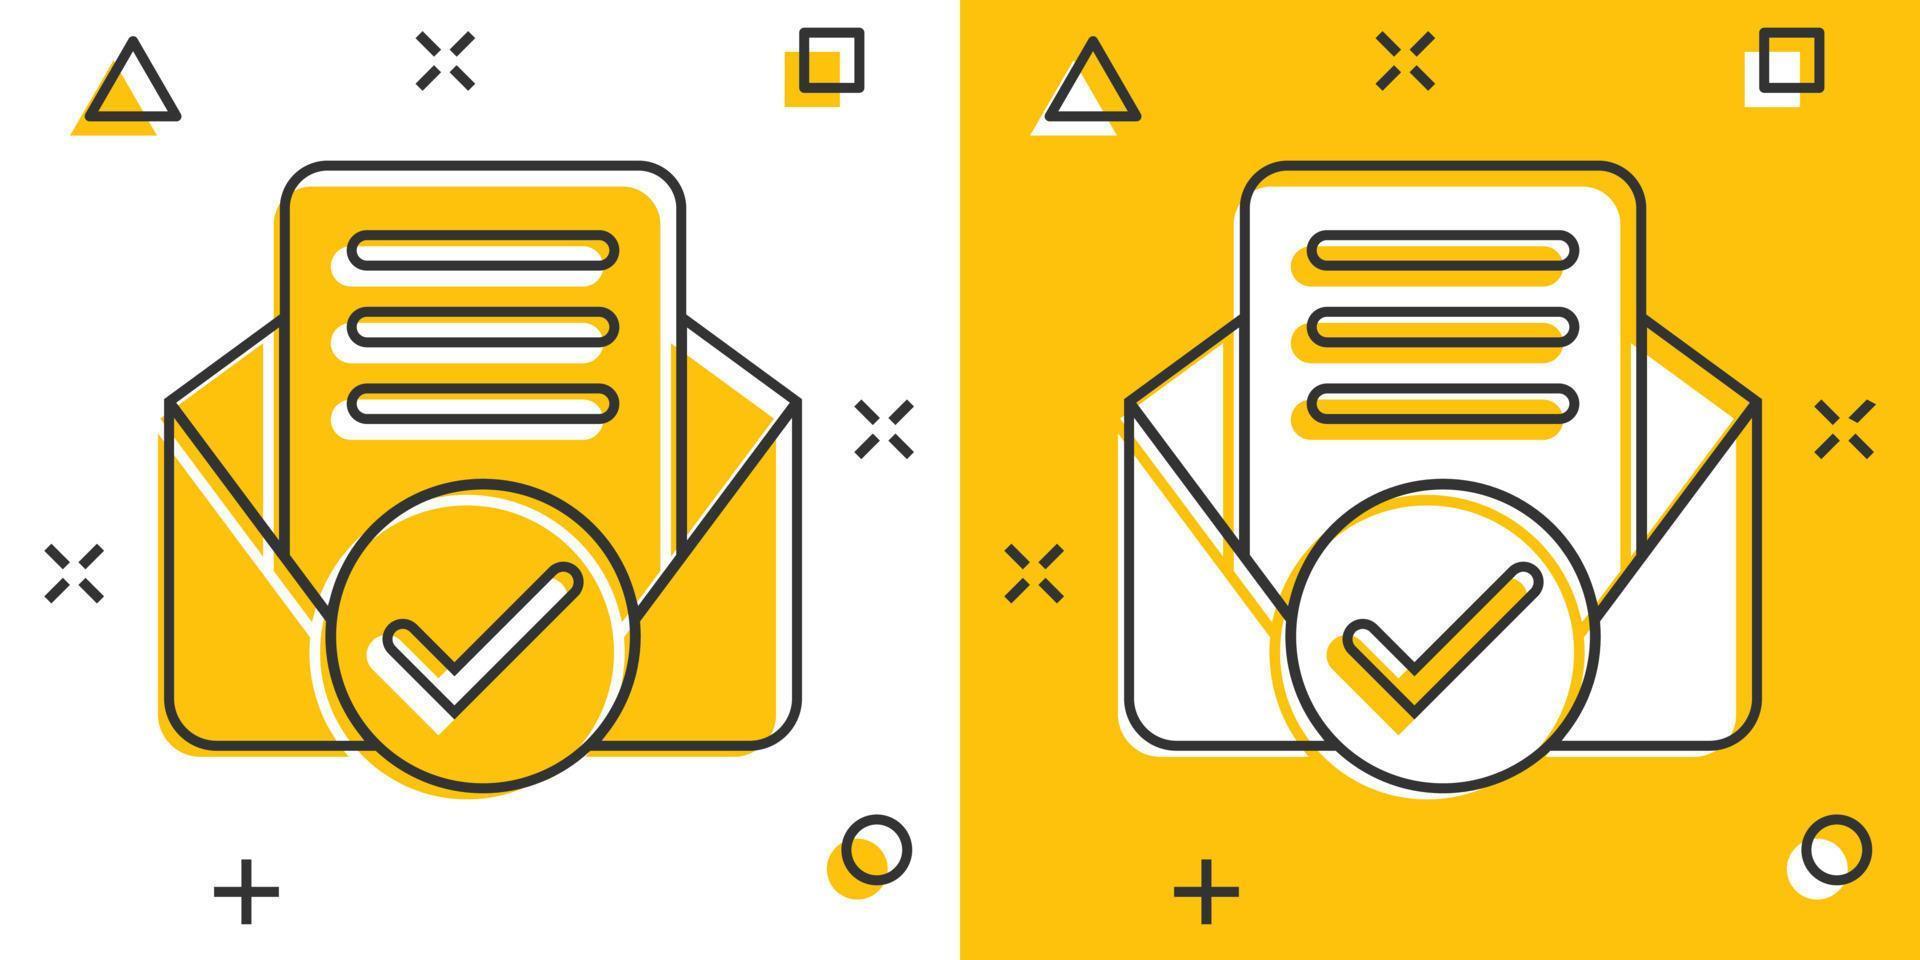 Envelope with confirmed document icon in comic style. Verify cartoon vector illustration on white isolated background. Receive splash effect business concept.